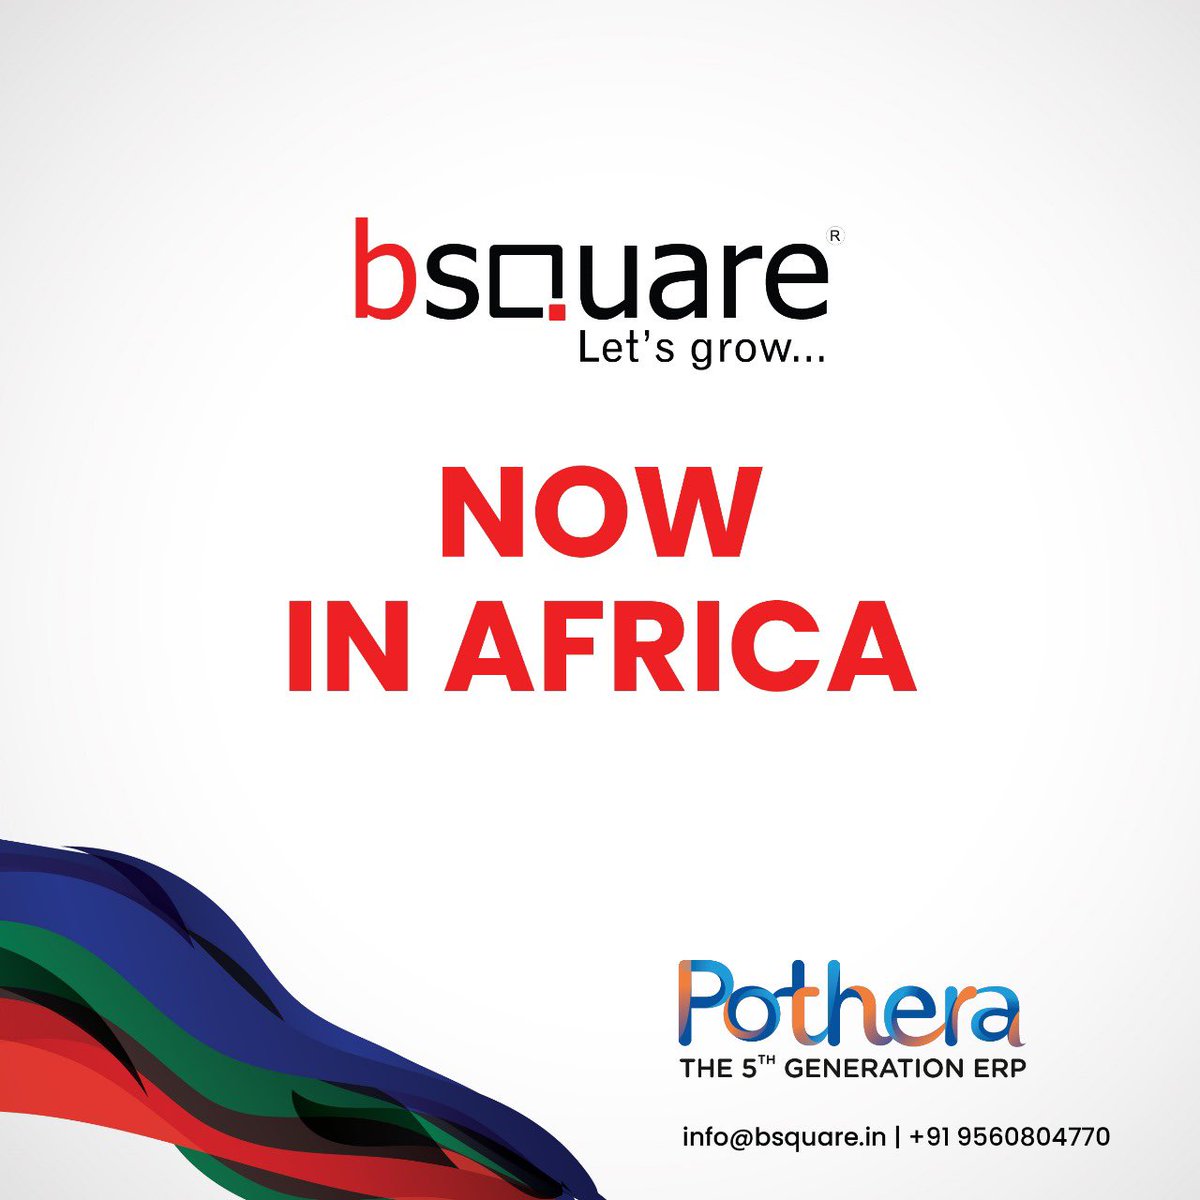 Bsquare slowly expanding its base to Africa. Pothera ERP is now implemented in Zambia, Uganda and other countries. Thank you all for your best wishes.